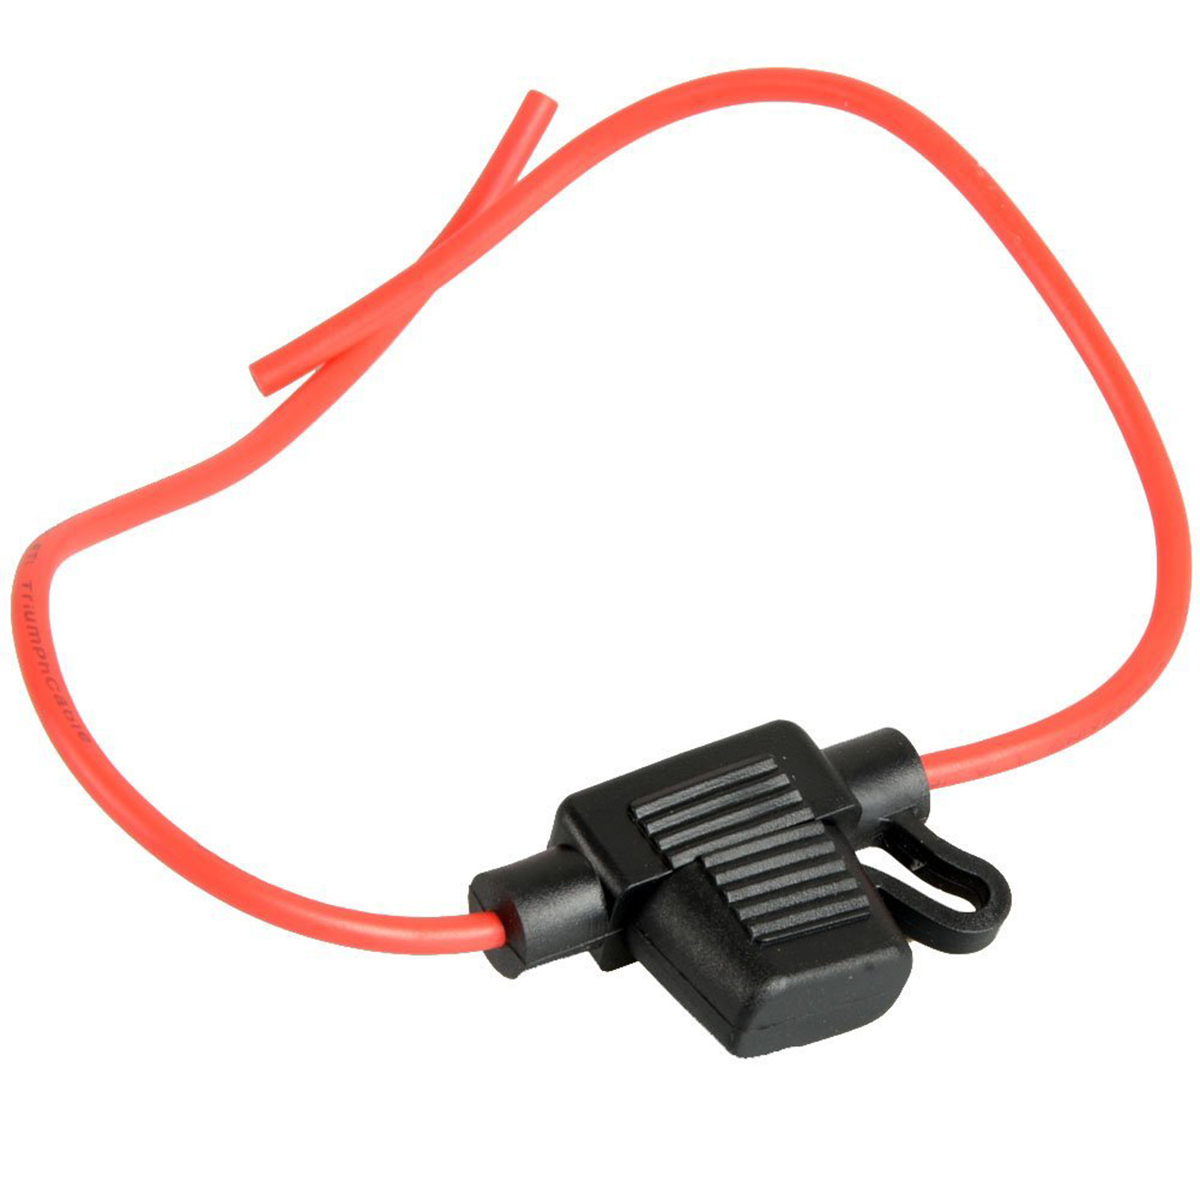 12V ATO ATC Add A Circuit Fuse Tap Piggy Back Standard Blade Fuse Holder with 10A Blade Fuse - Size M